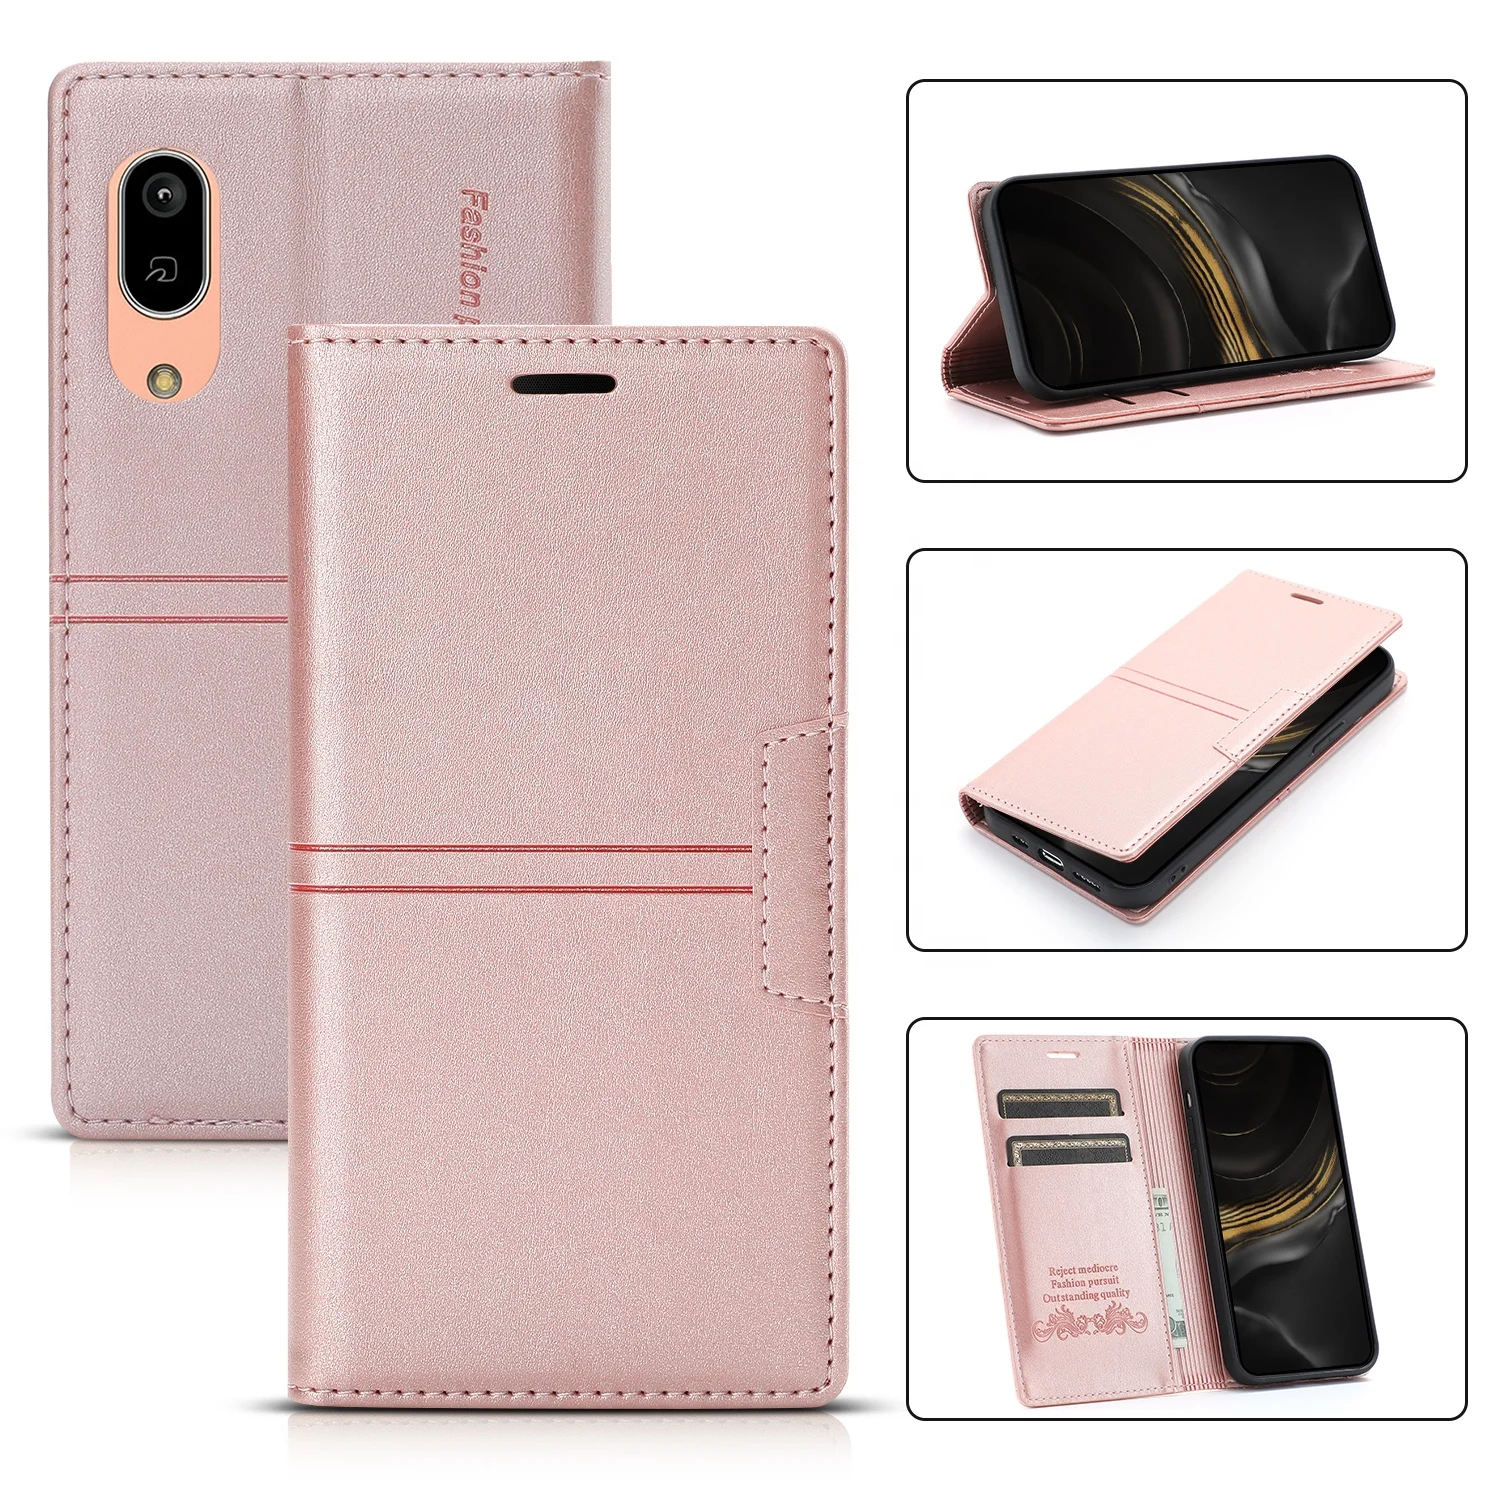 

Luxury PU Leather Flip Case Protective Cover for SHARP Aquos Sense 2 3 4 Phone Case For SHV44 Aquos R R2 Compact